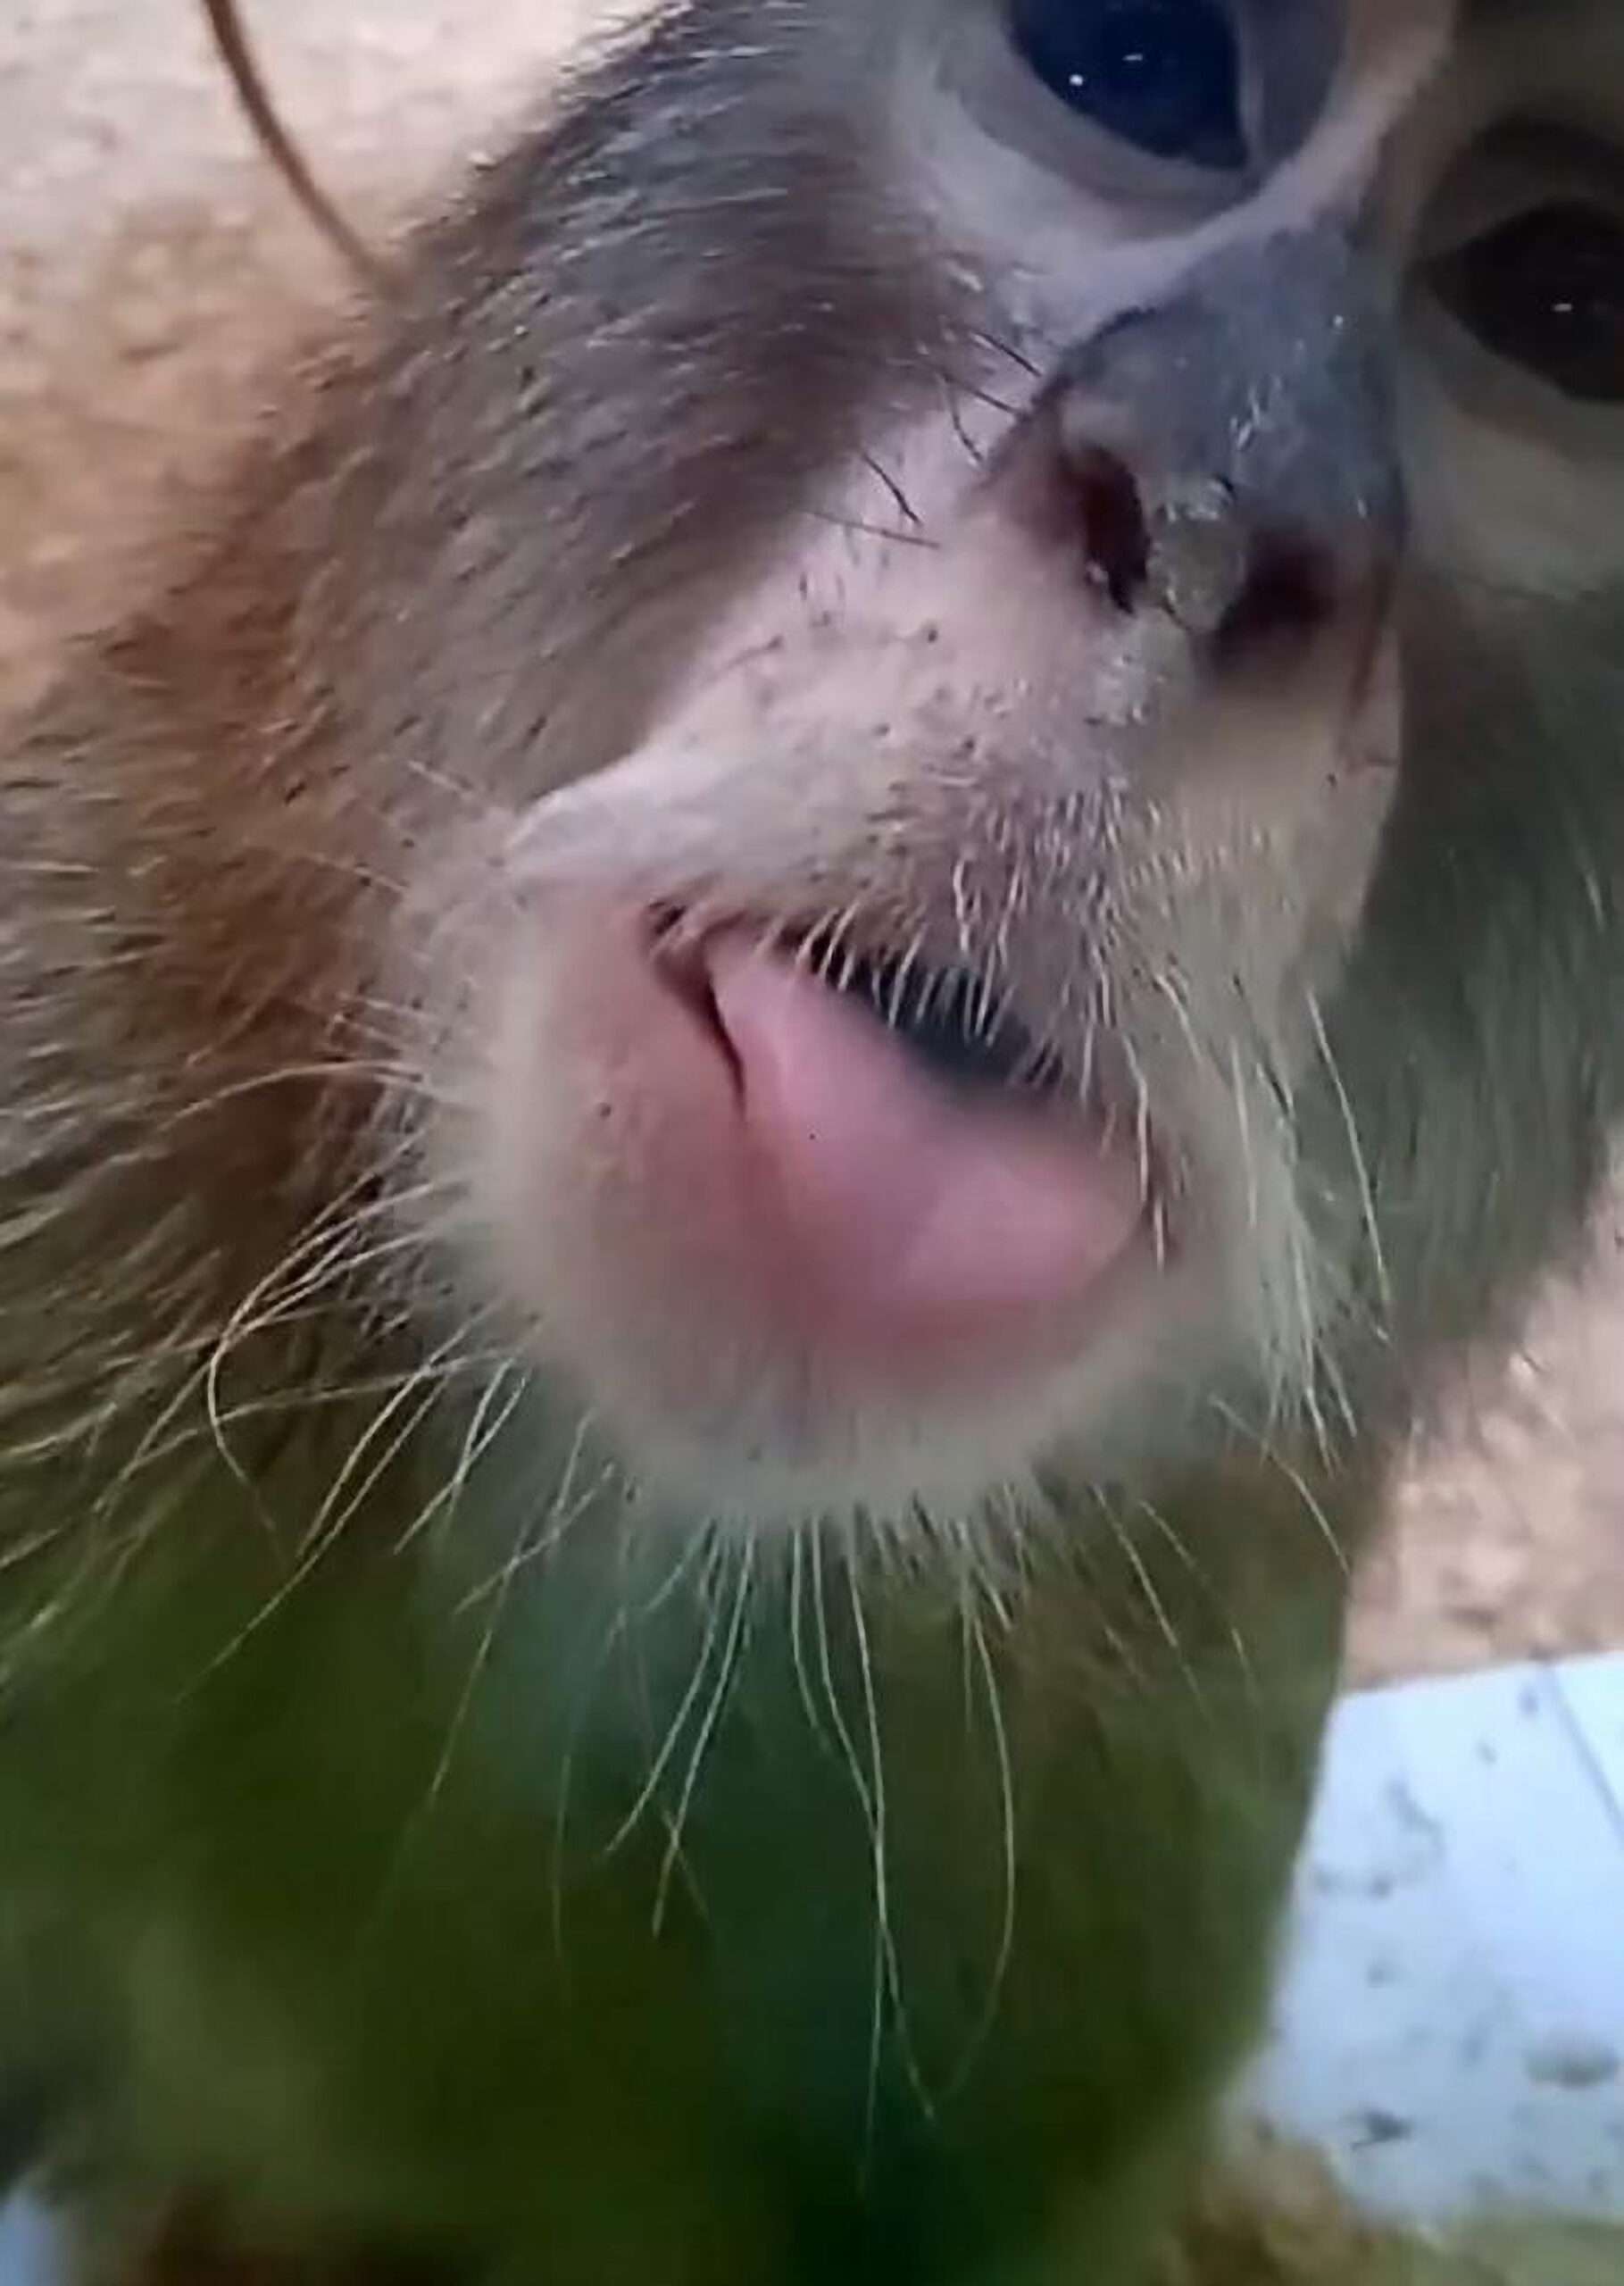 Read more about the article A STAR IS BORN: Cheeky Monkey Sticks Out Tongue At Camera That Had Been Recording Its Roomie